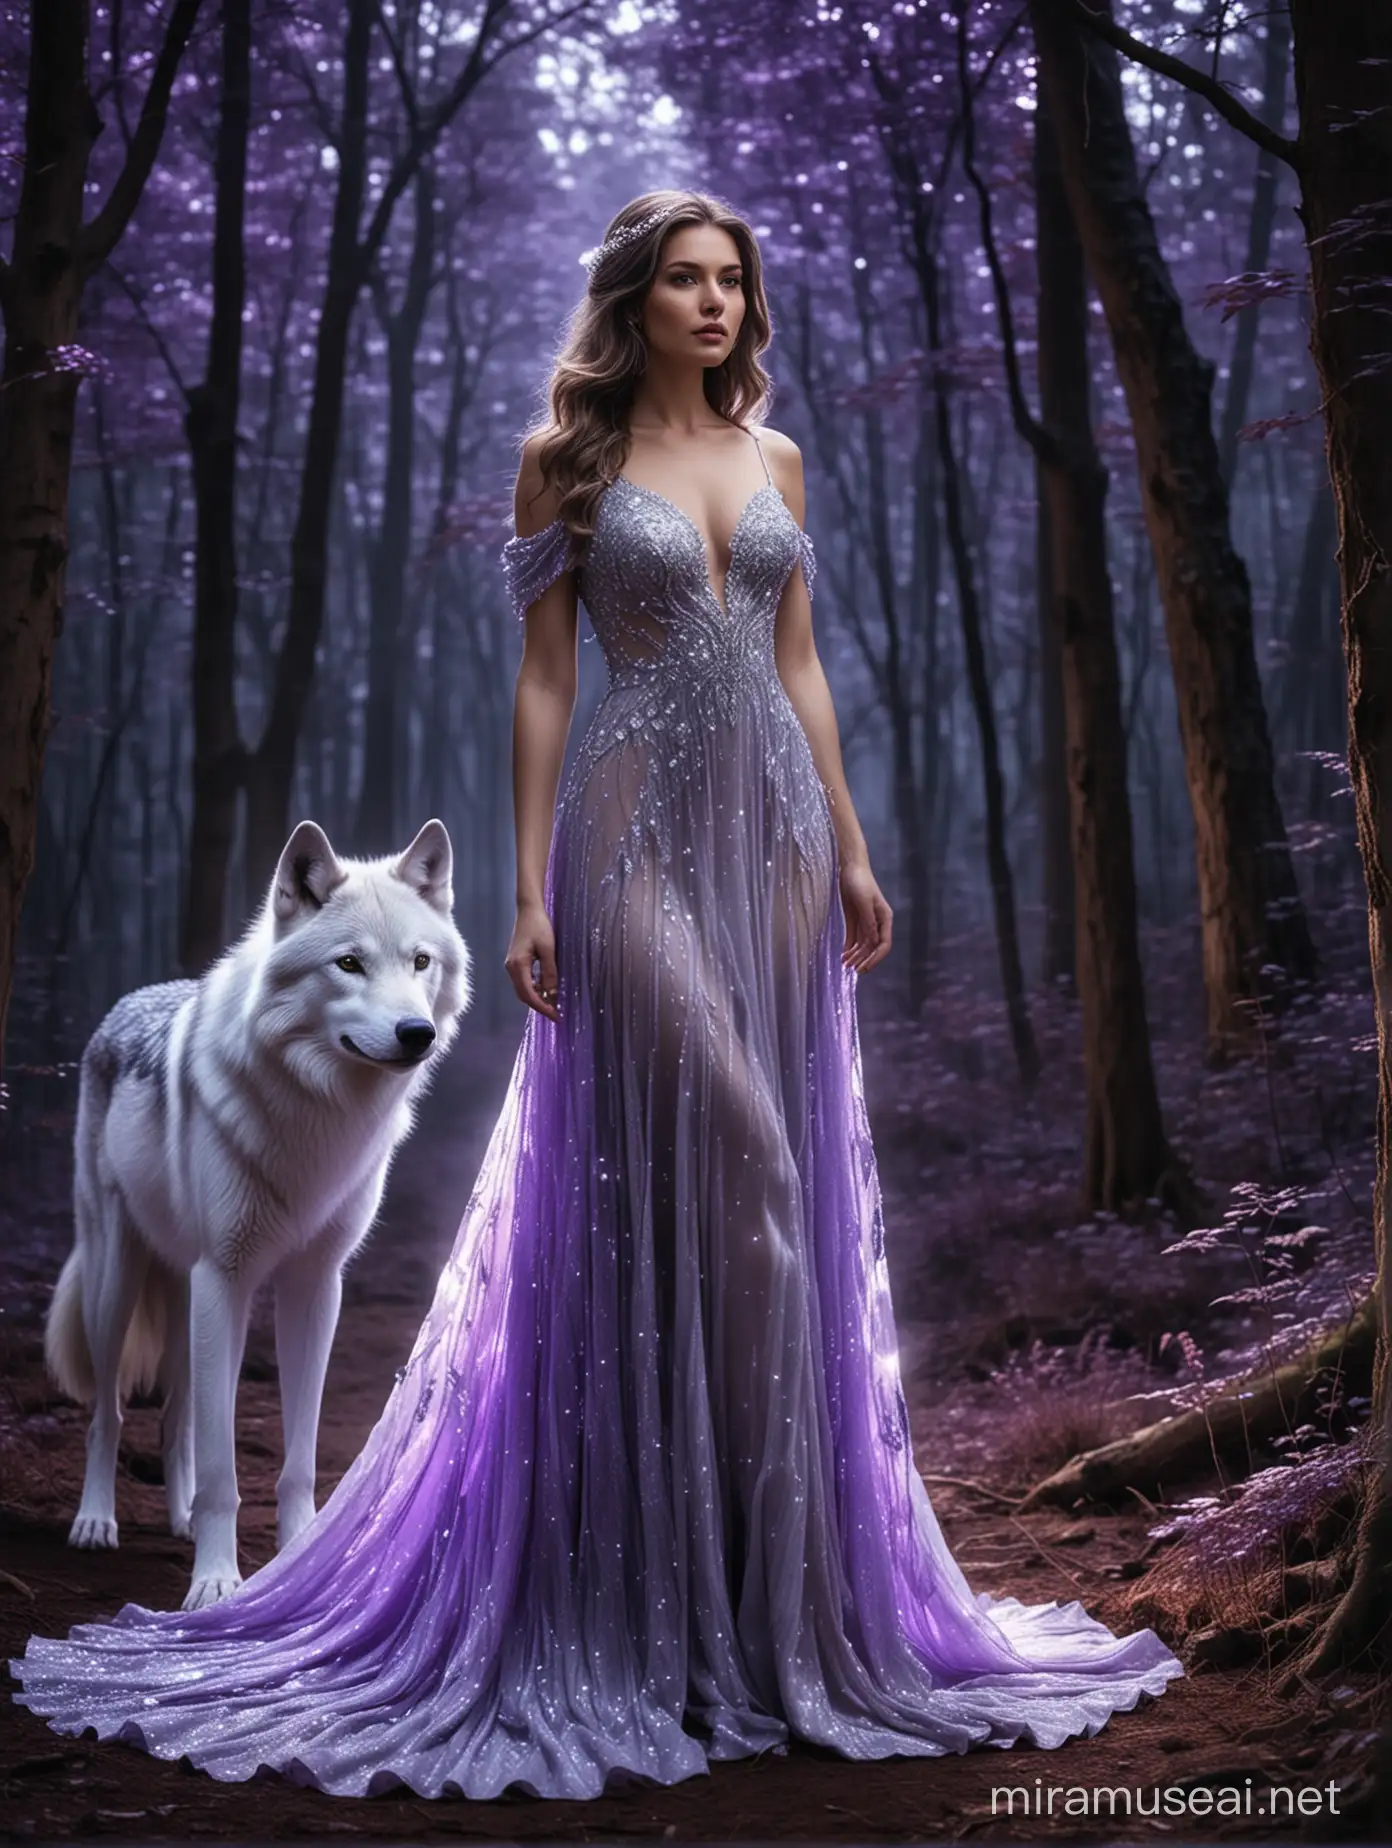 Enchanting Lady in Sparkling Dress with Luminous Wolf in Dark Forest